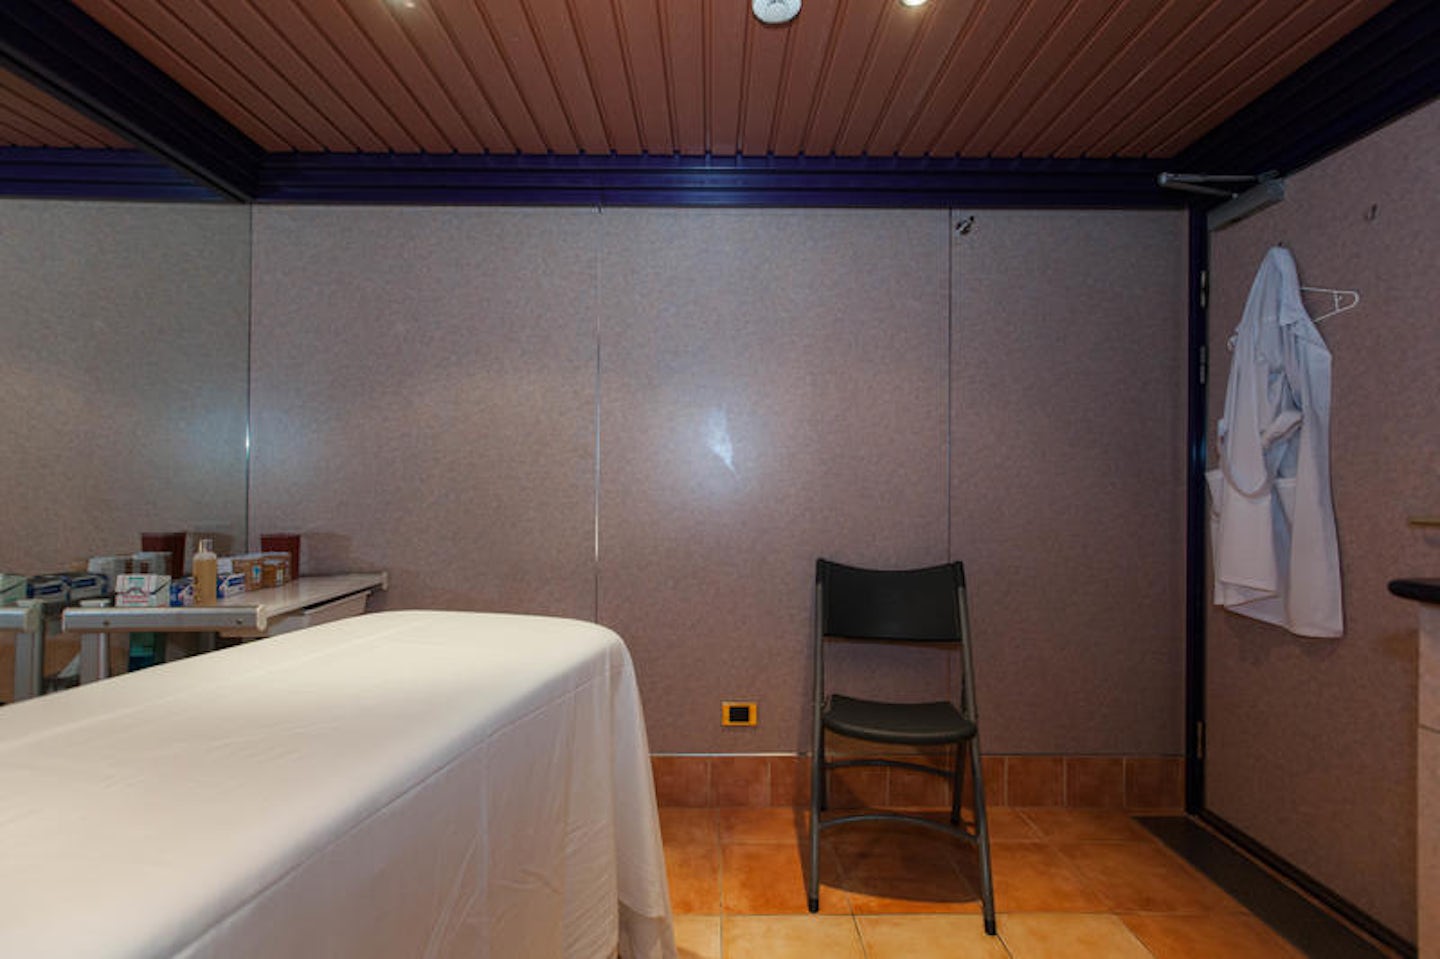 Treatment Room 10 on Carnival Conquest